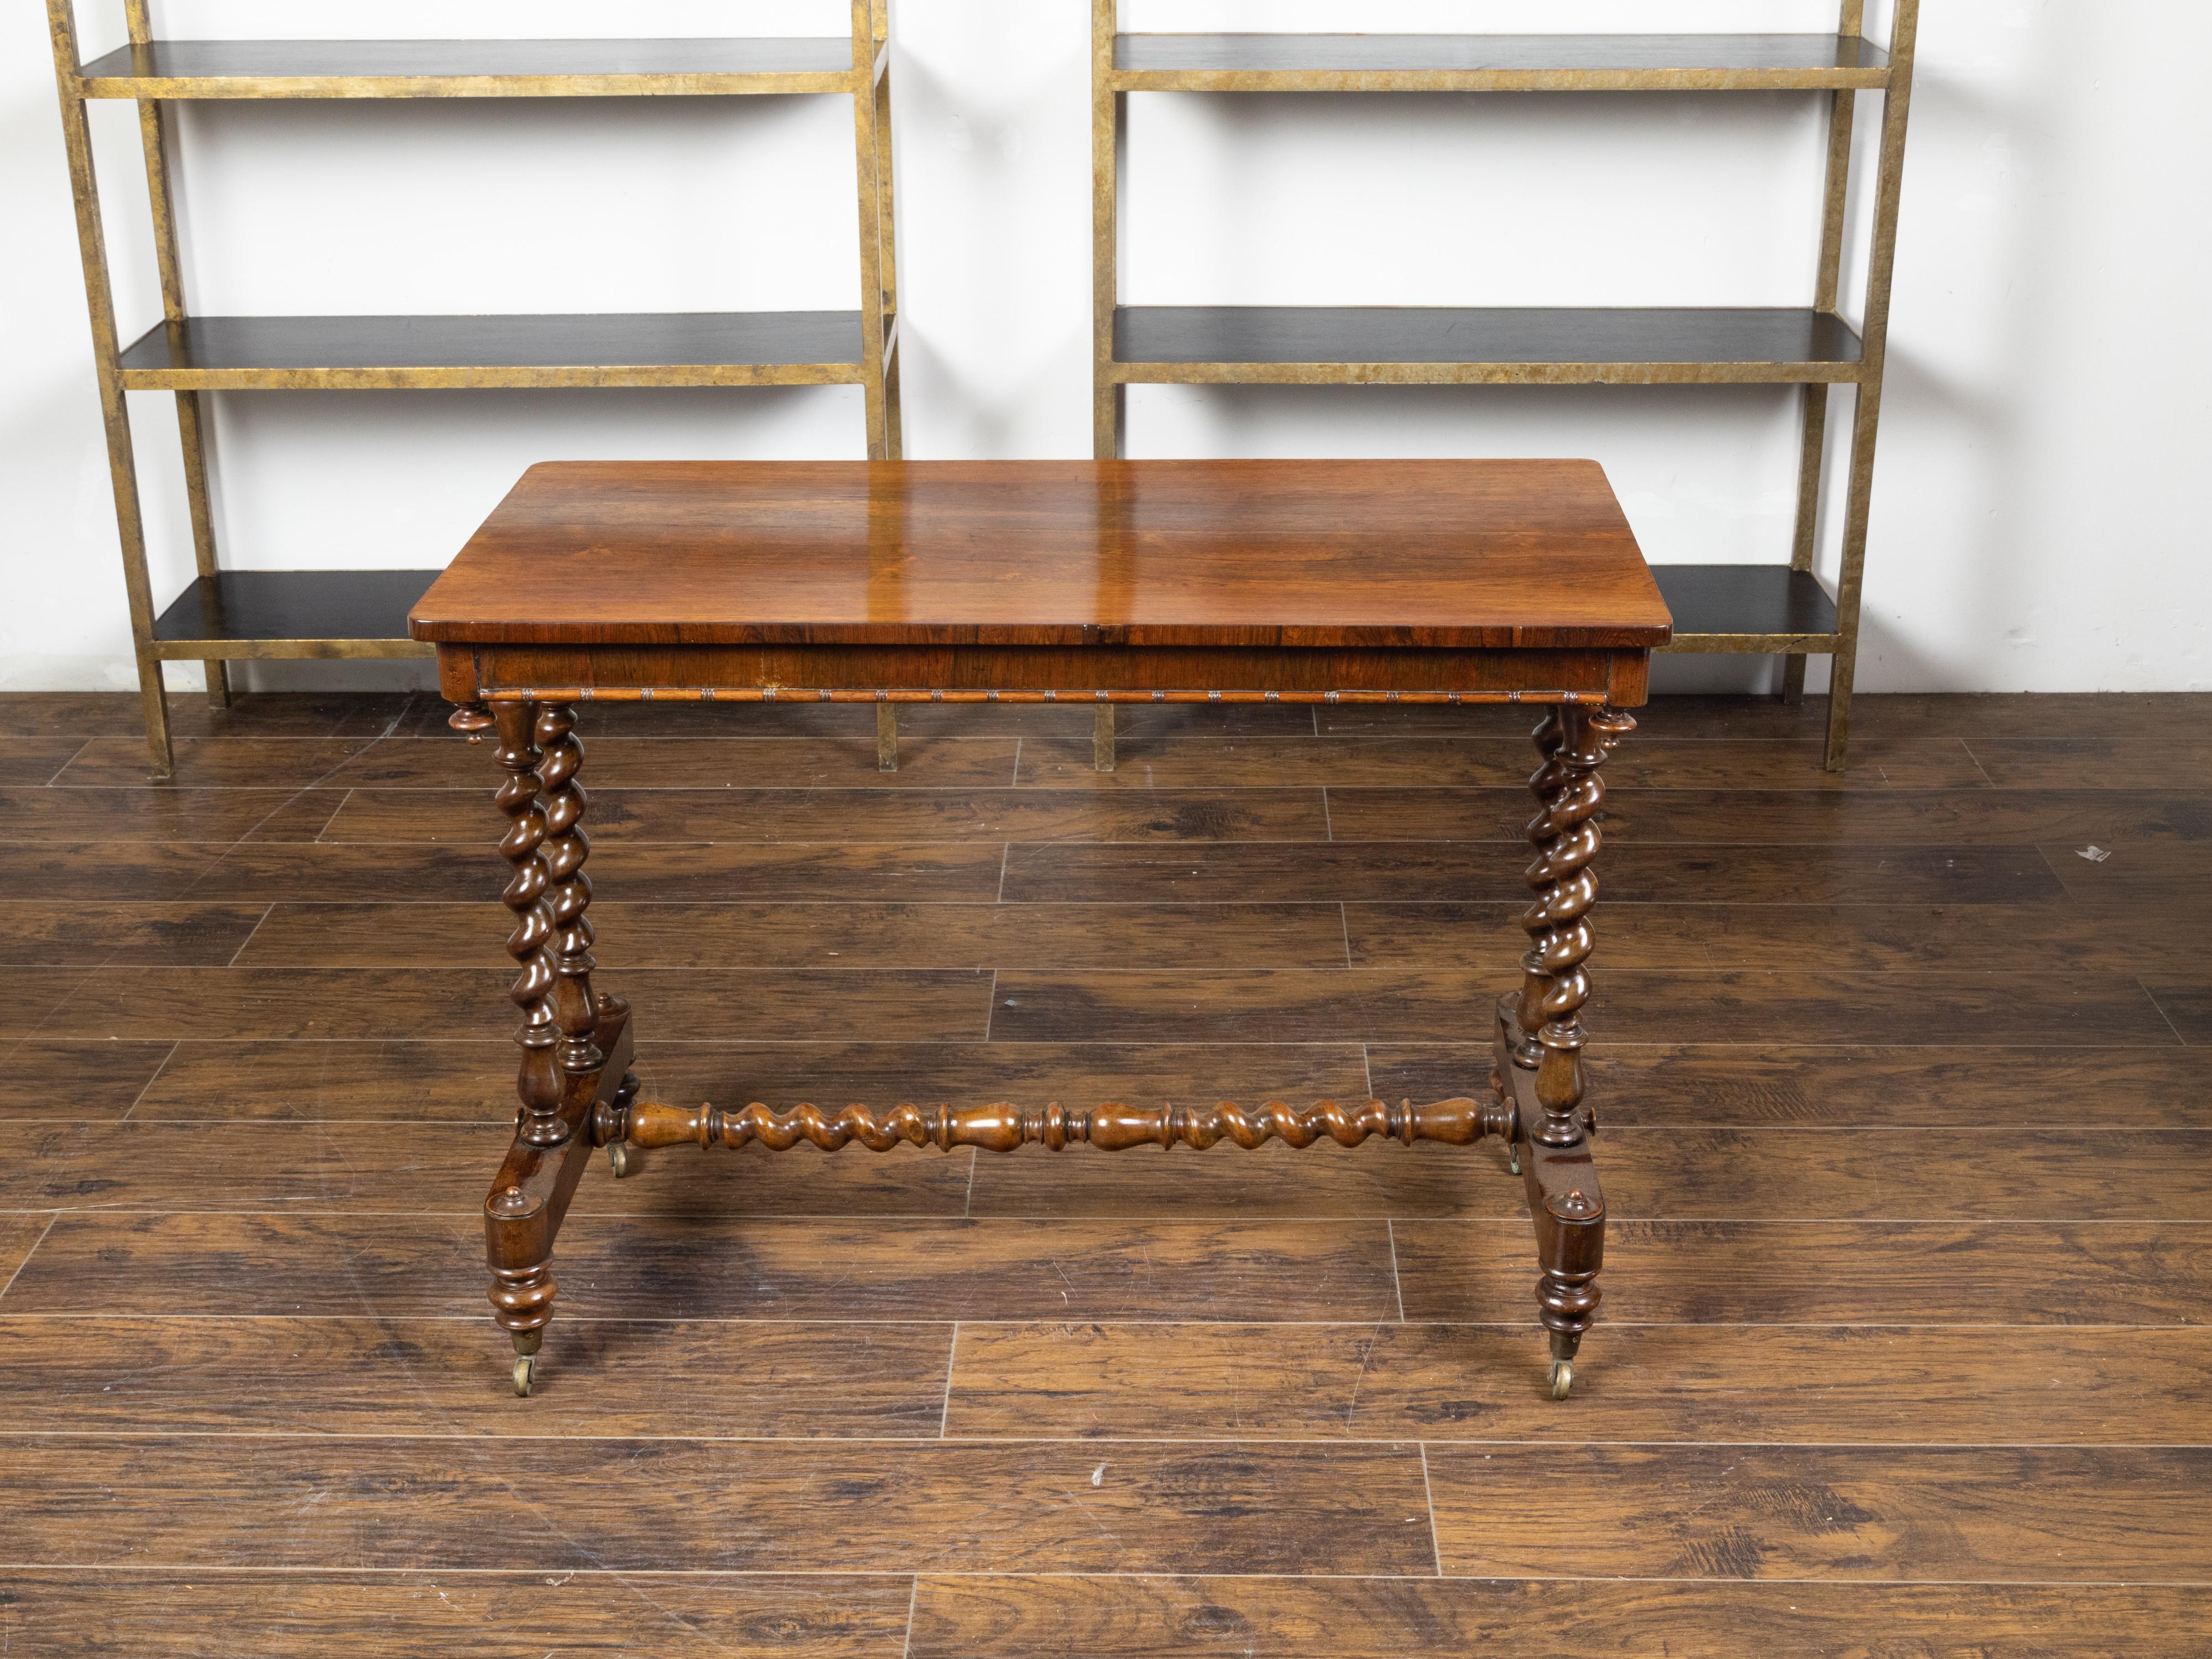 An English mahogany table from the mid 19th century, with barley twist base and casters. Created in England during the third quarter of the 19th century, this mahogany table features a rectangular top with inverted finials on the apron's corners,